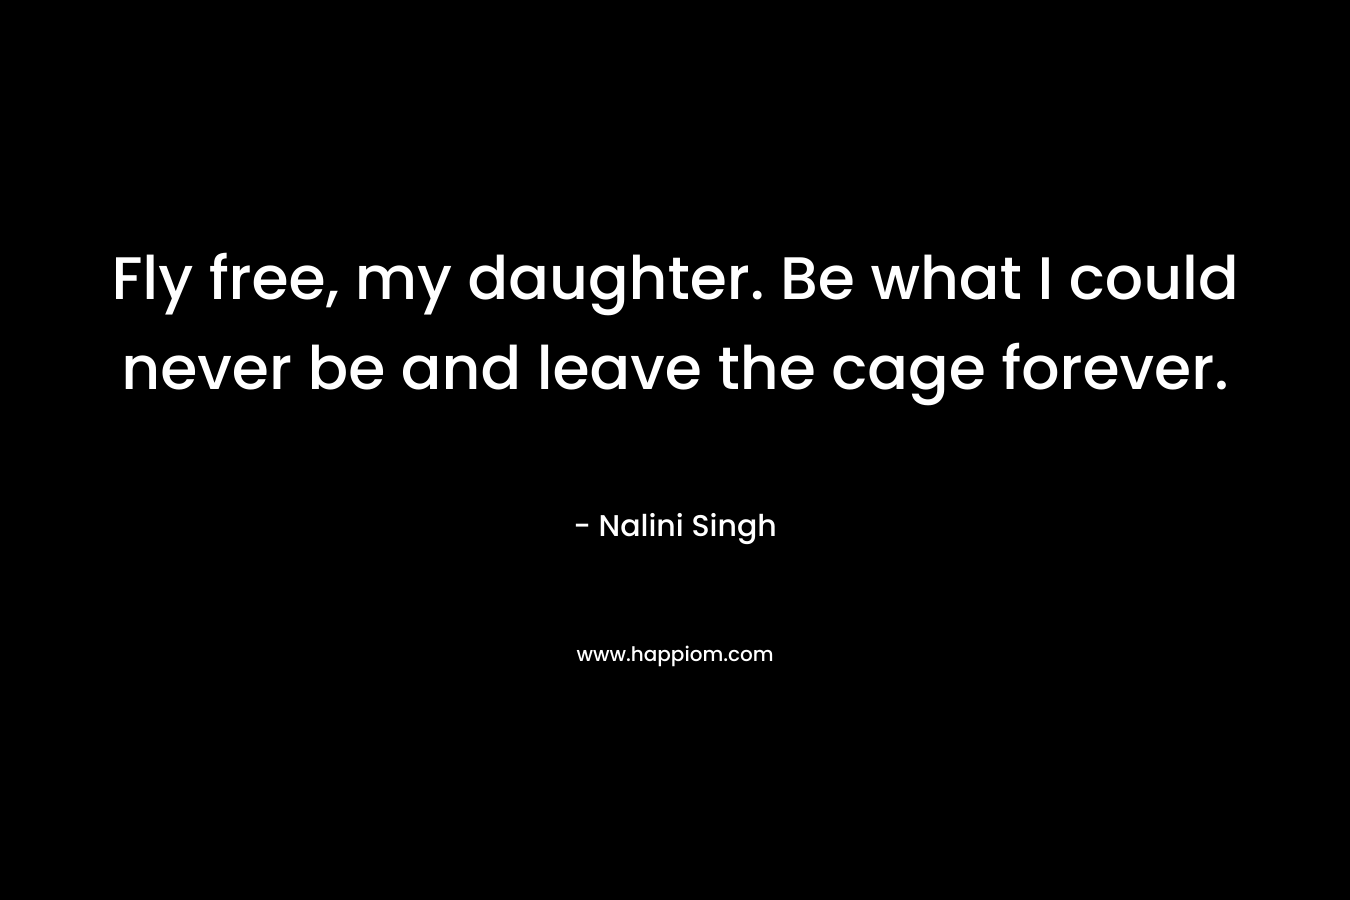 Fly free, my daughter. Be what I could never be and leave the cage forever.